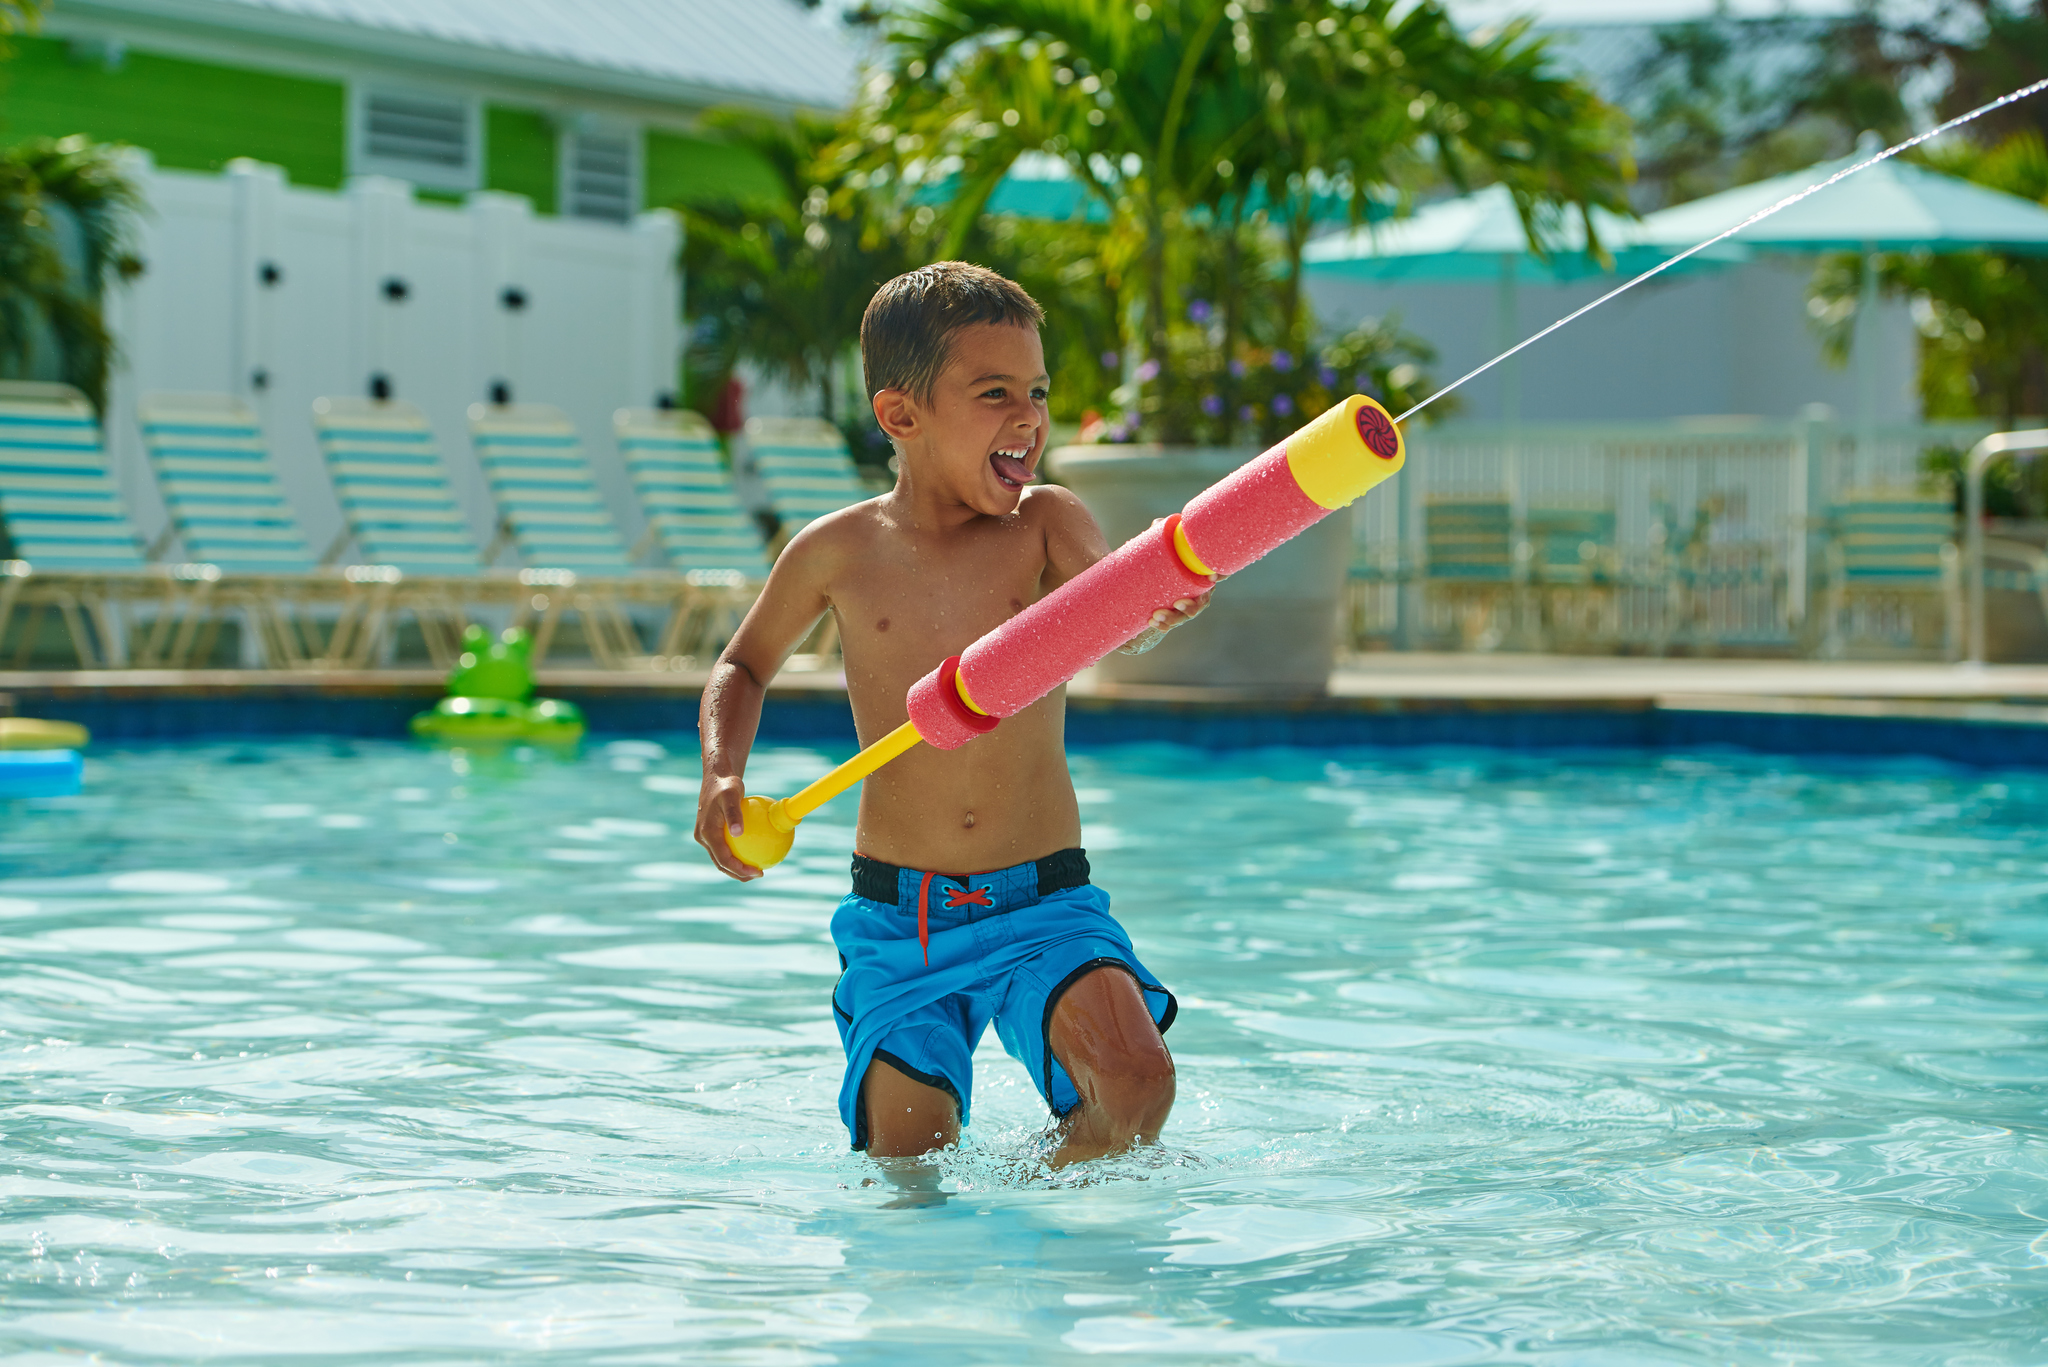 Young boy wearing blue bathing suit shooting water gun and smiling in pool